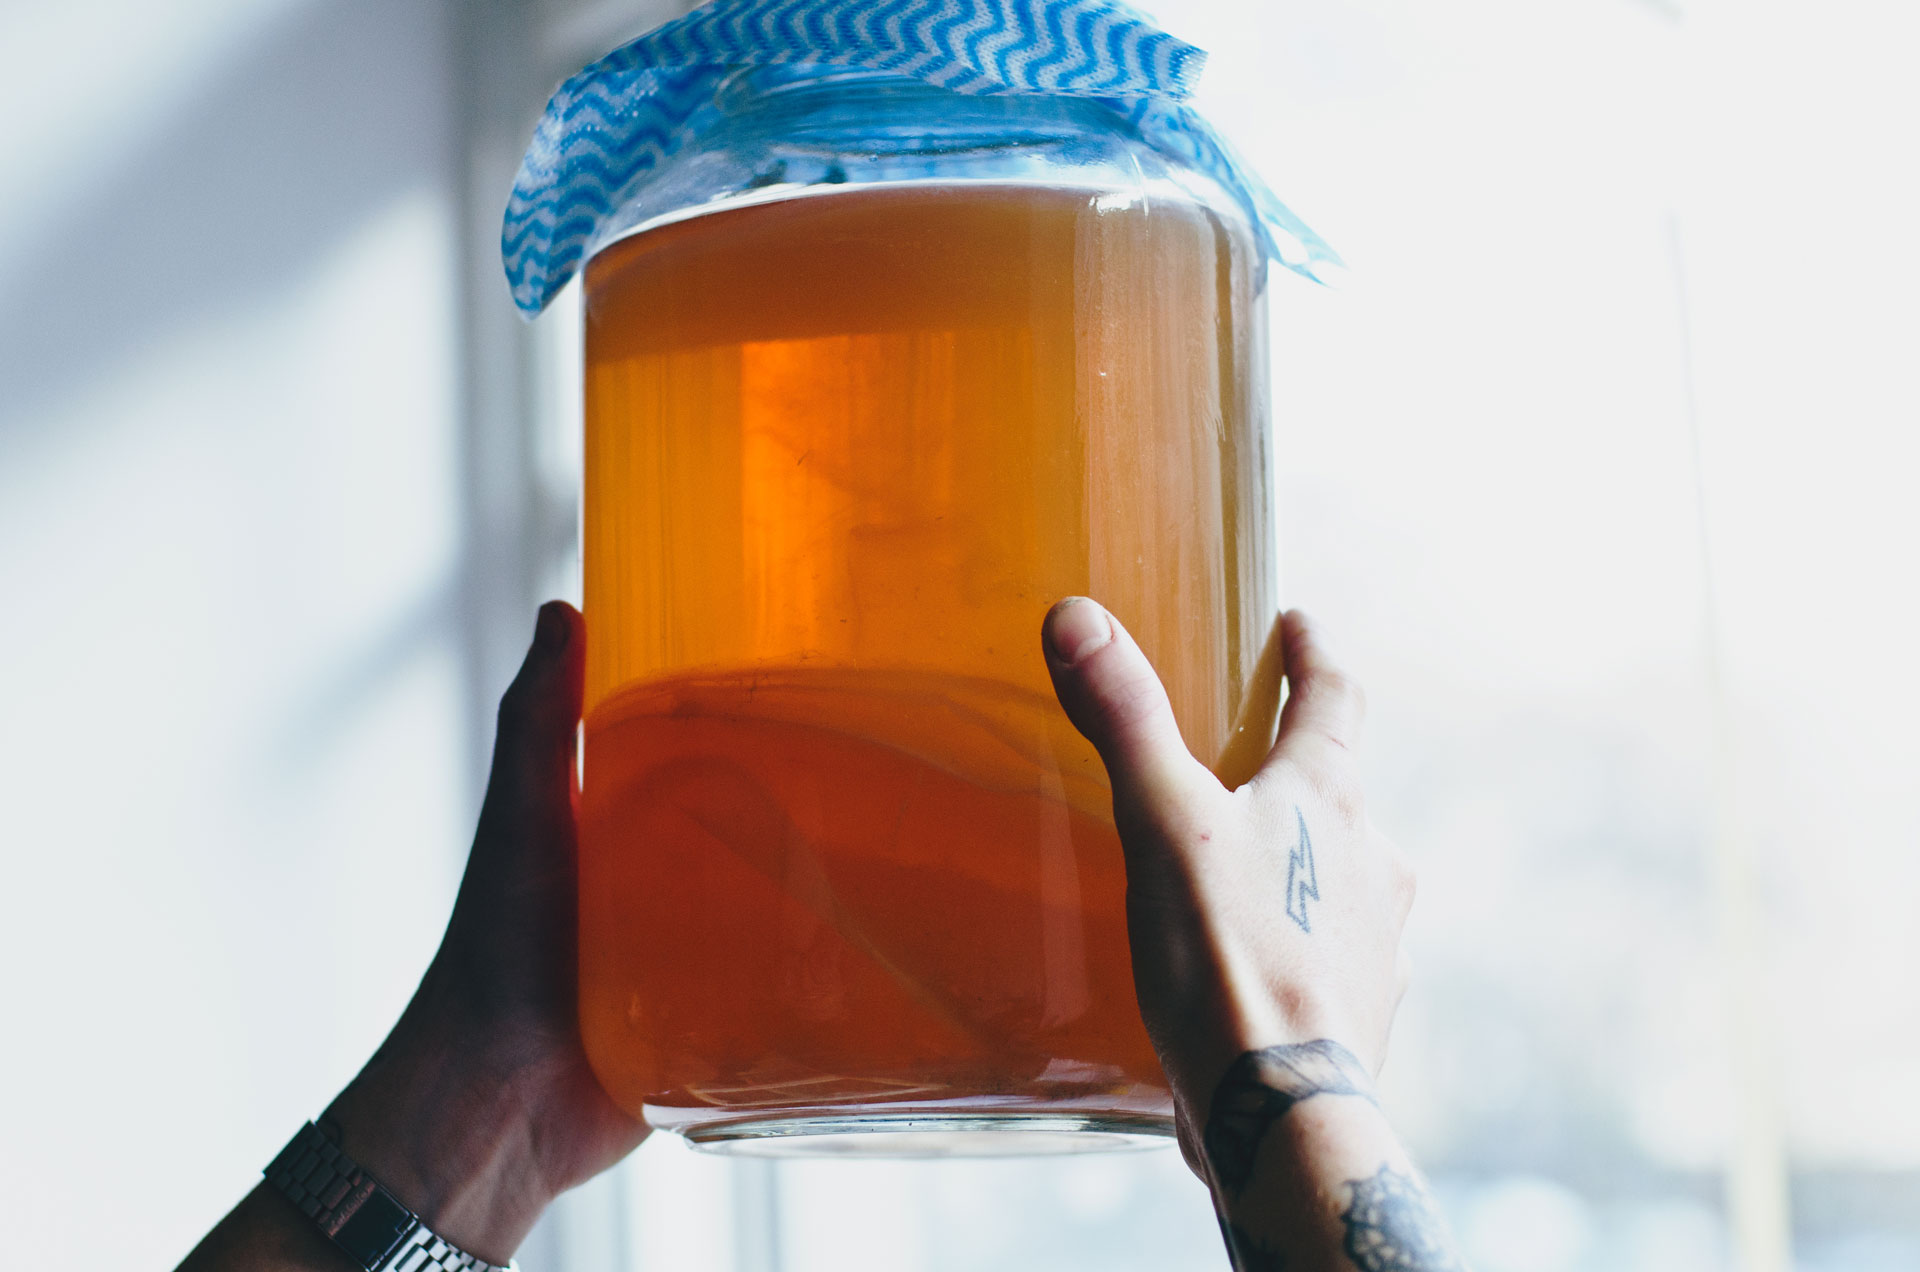 Berlin Kombucha Society made a new batch of delicious and healthy fermented tea with a SCOBY